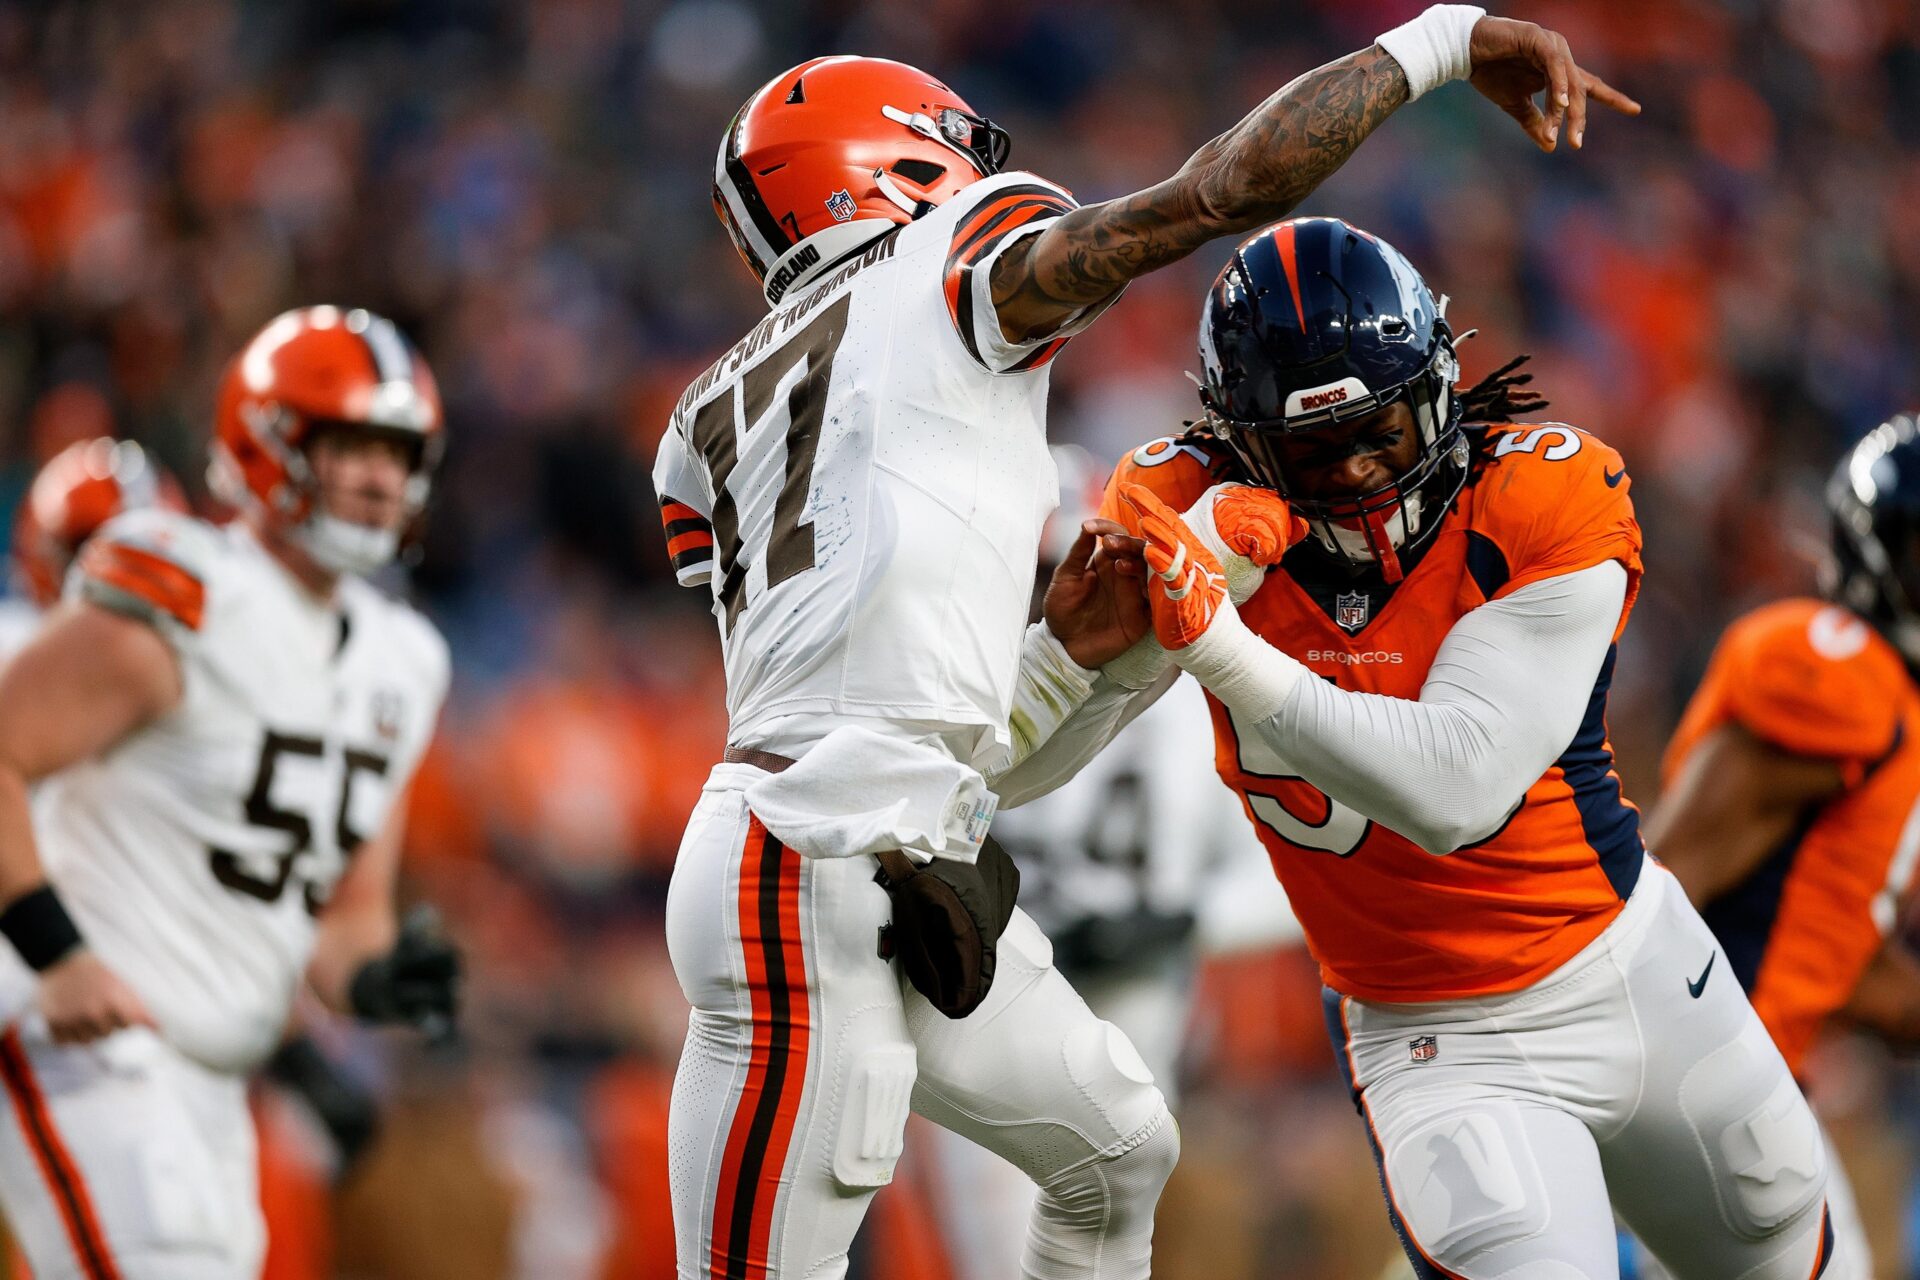 Cleveland Browns quarterback Dorian Thompson-Robinson (17) is hit by Denver Broncos linebacker Baron Browning (56).